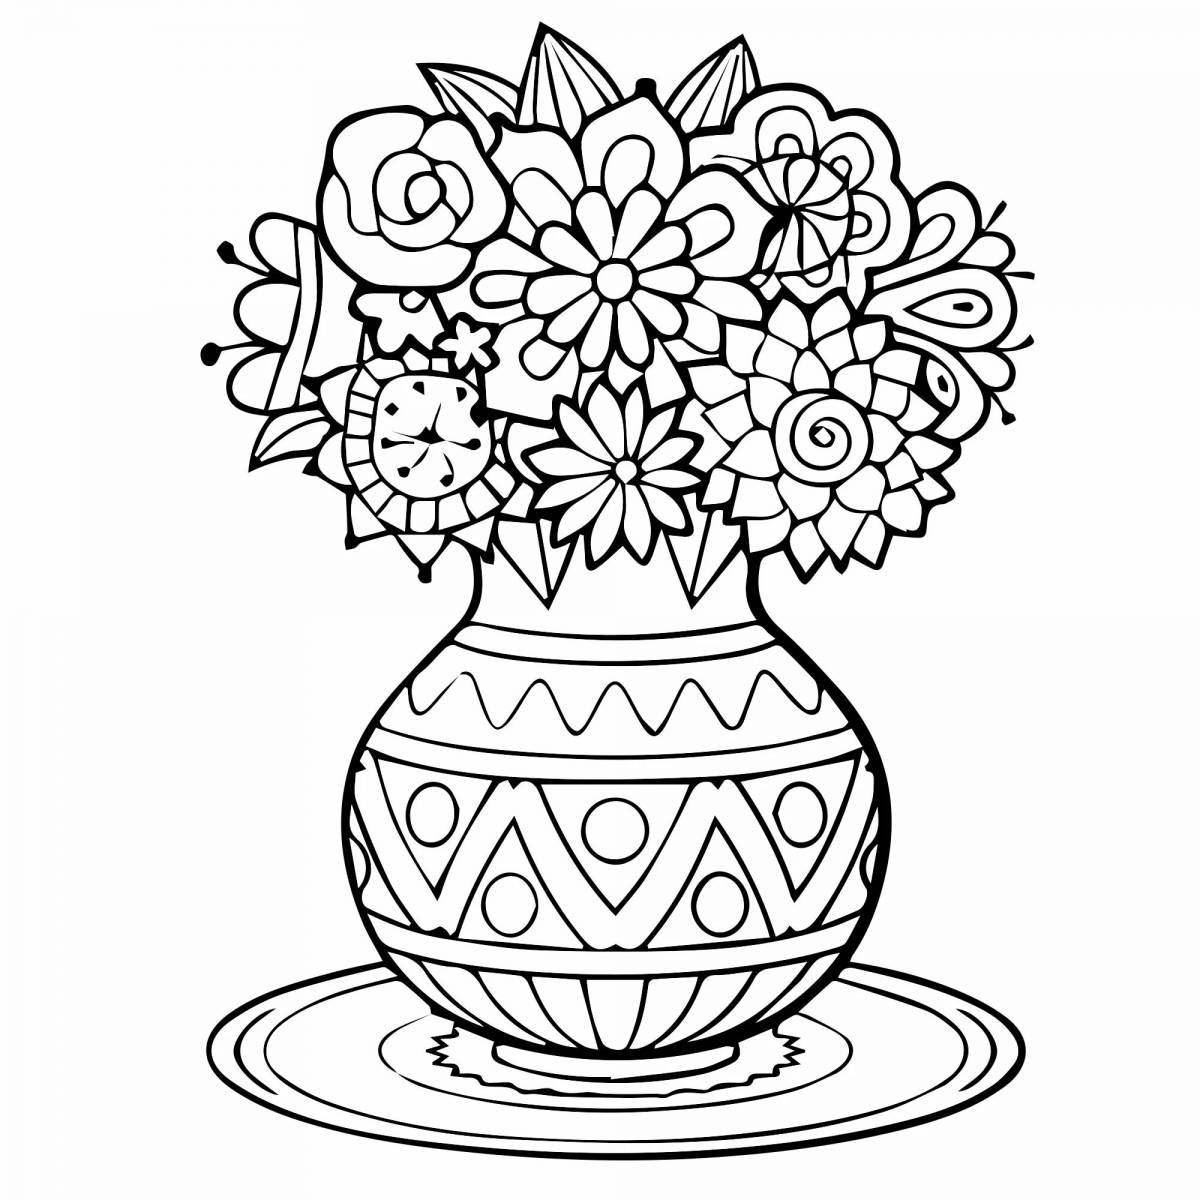 Coloring big colorful flowers in a vase